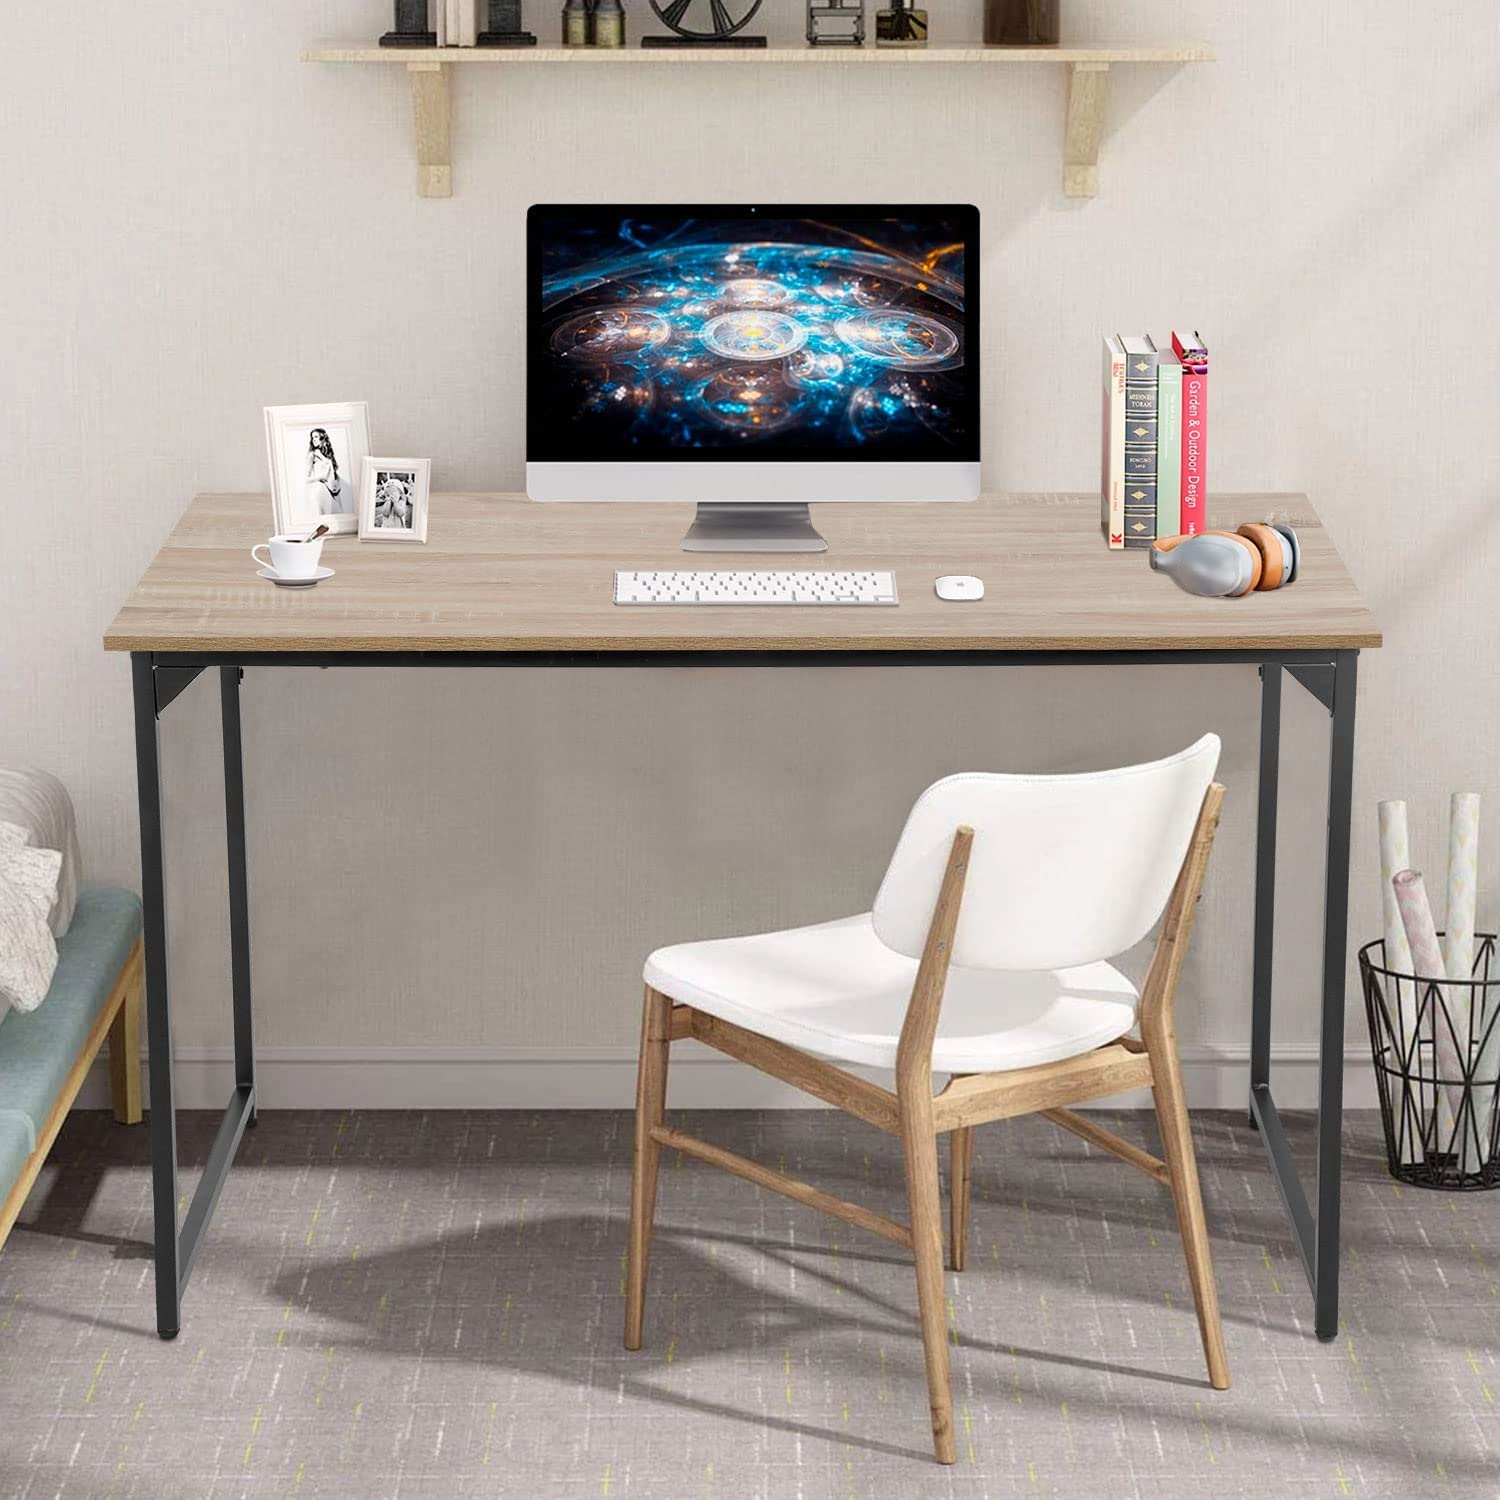 PayLessHere 47 inch Computer Desk Modern Writing Desk for Adults,Nature - image 1 of 8